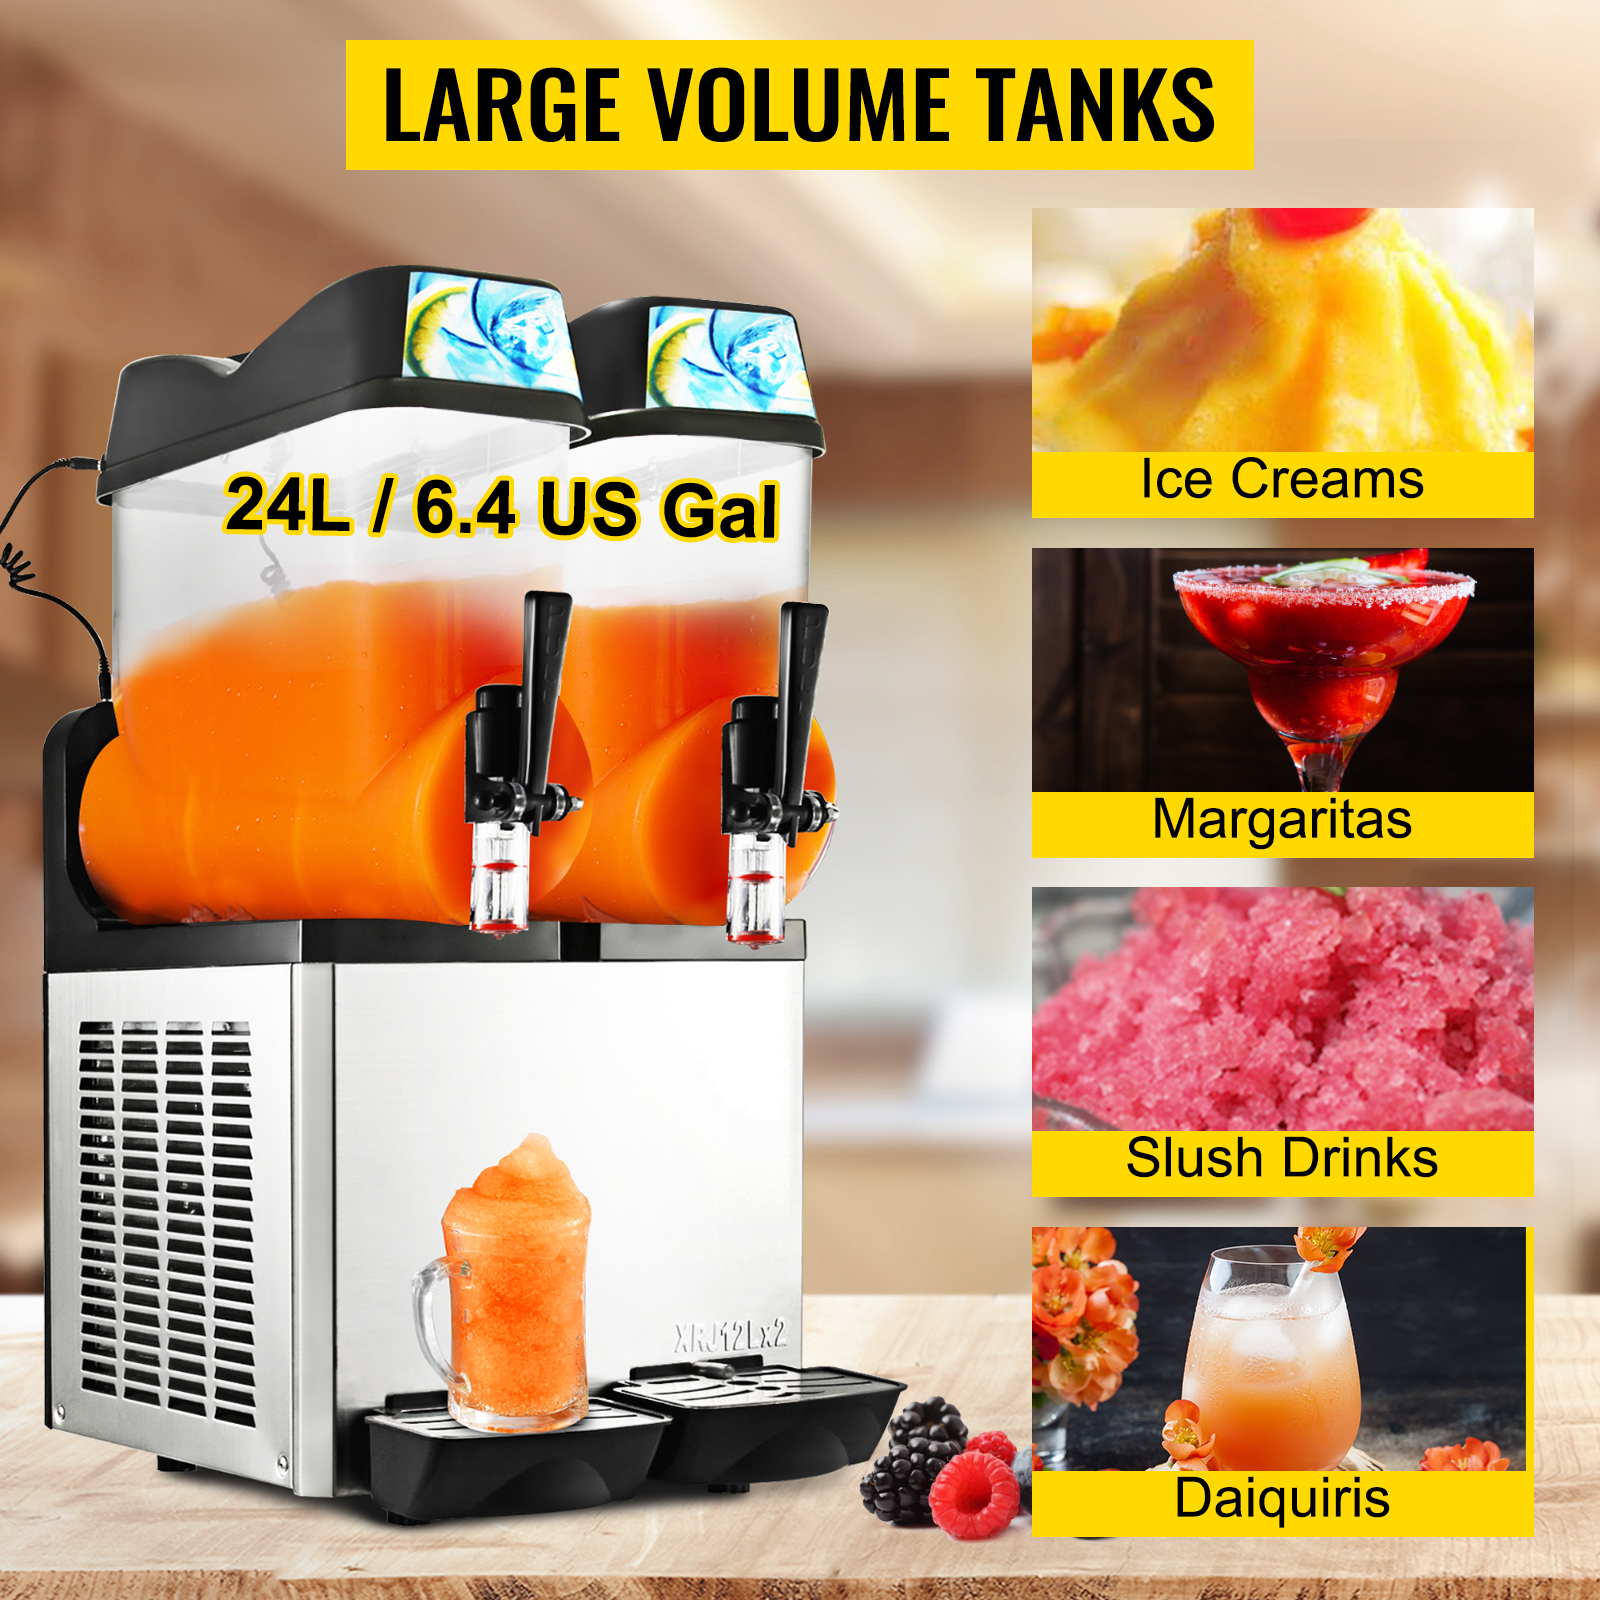 15Lx 1 Tank Stainless Steel Margarita Smoothie Frozen Drink Maker Perfect for Ice Juice Tea Coffee Making Commercial Slushy Machine 